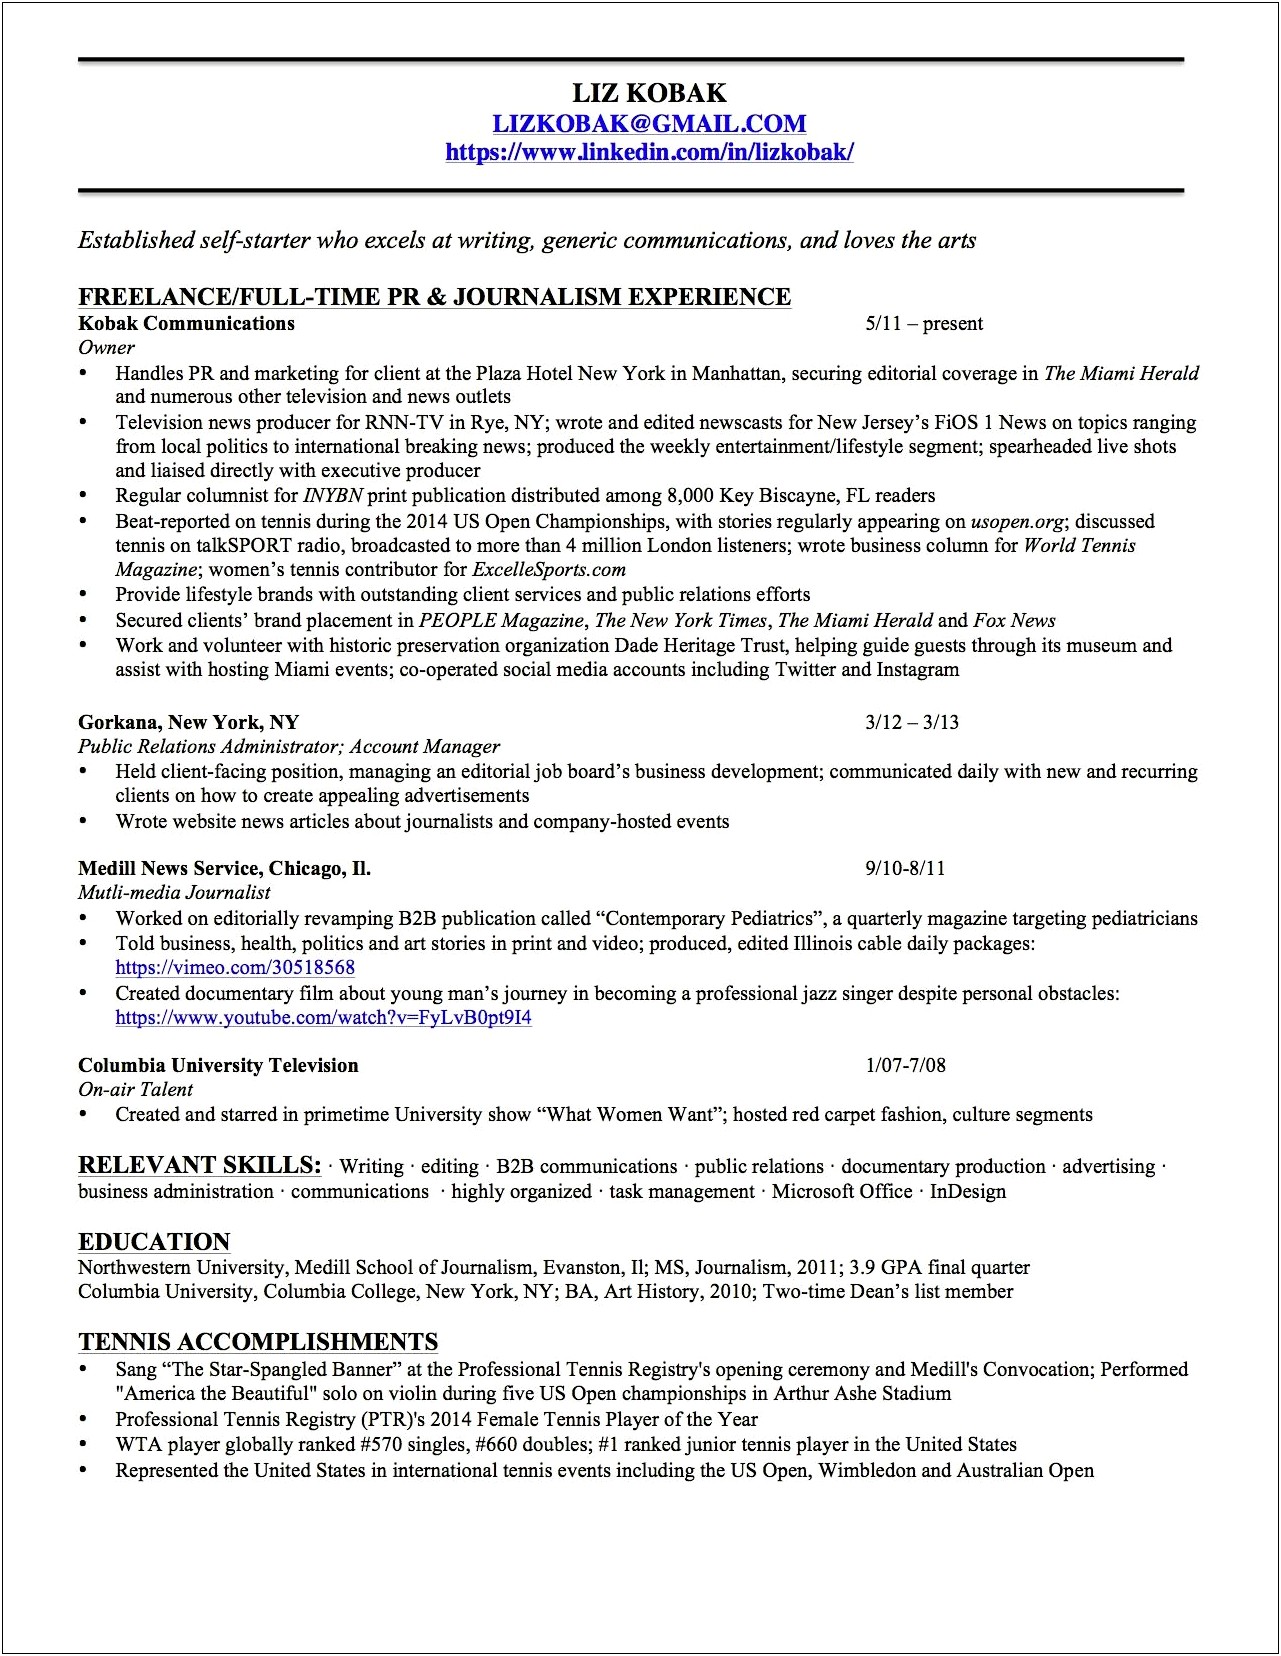 Event Management And Service Watch Resume